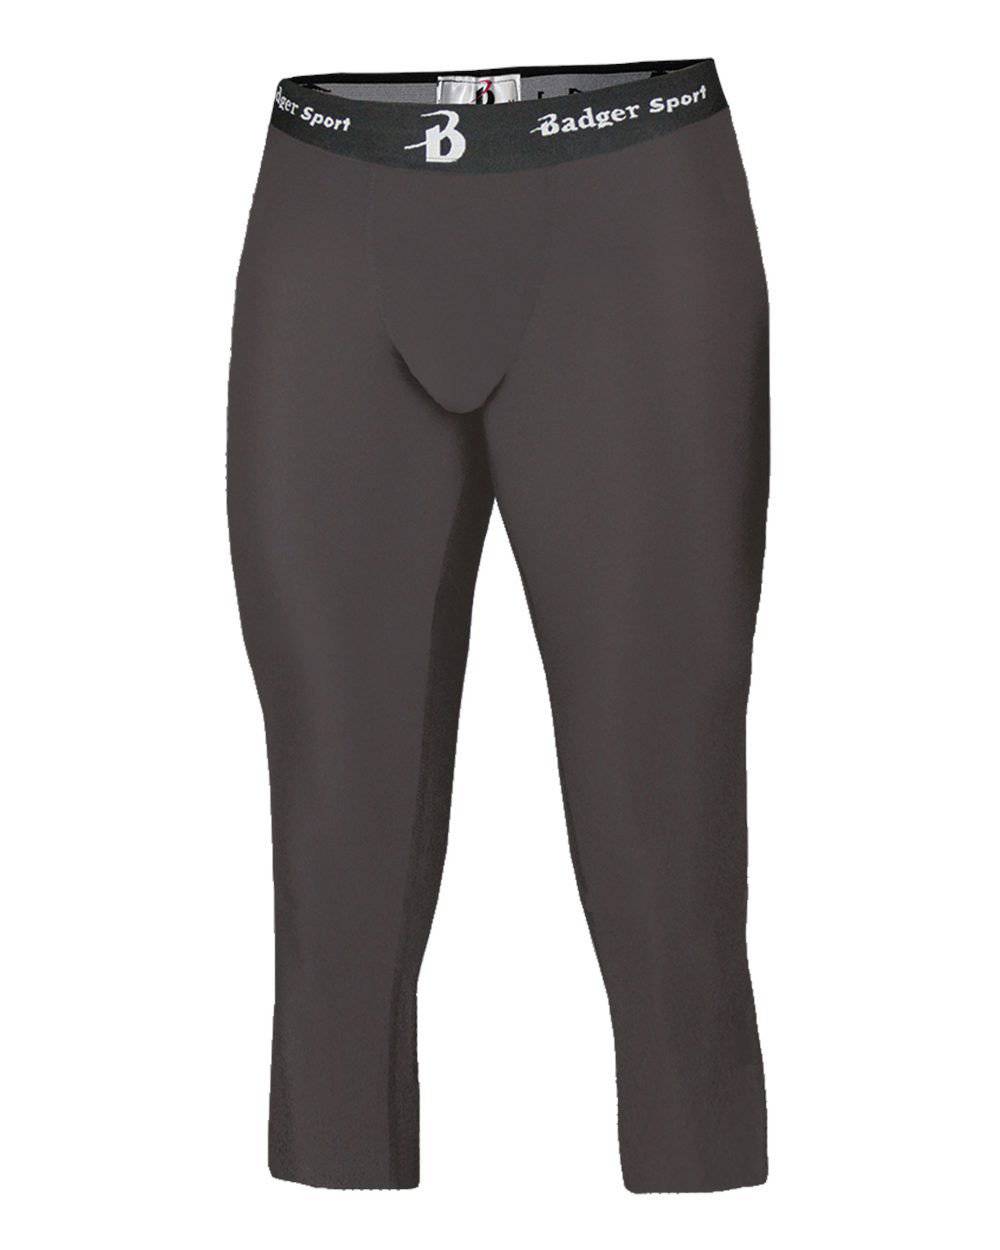 Badger Sport 4611 Calf Length Compression Tight - Graphite - HIT a Double - 1